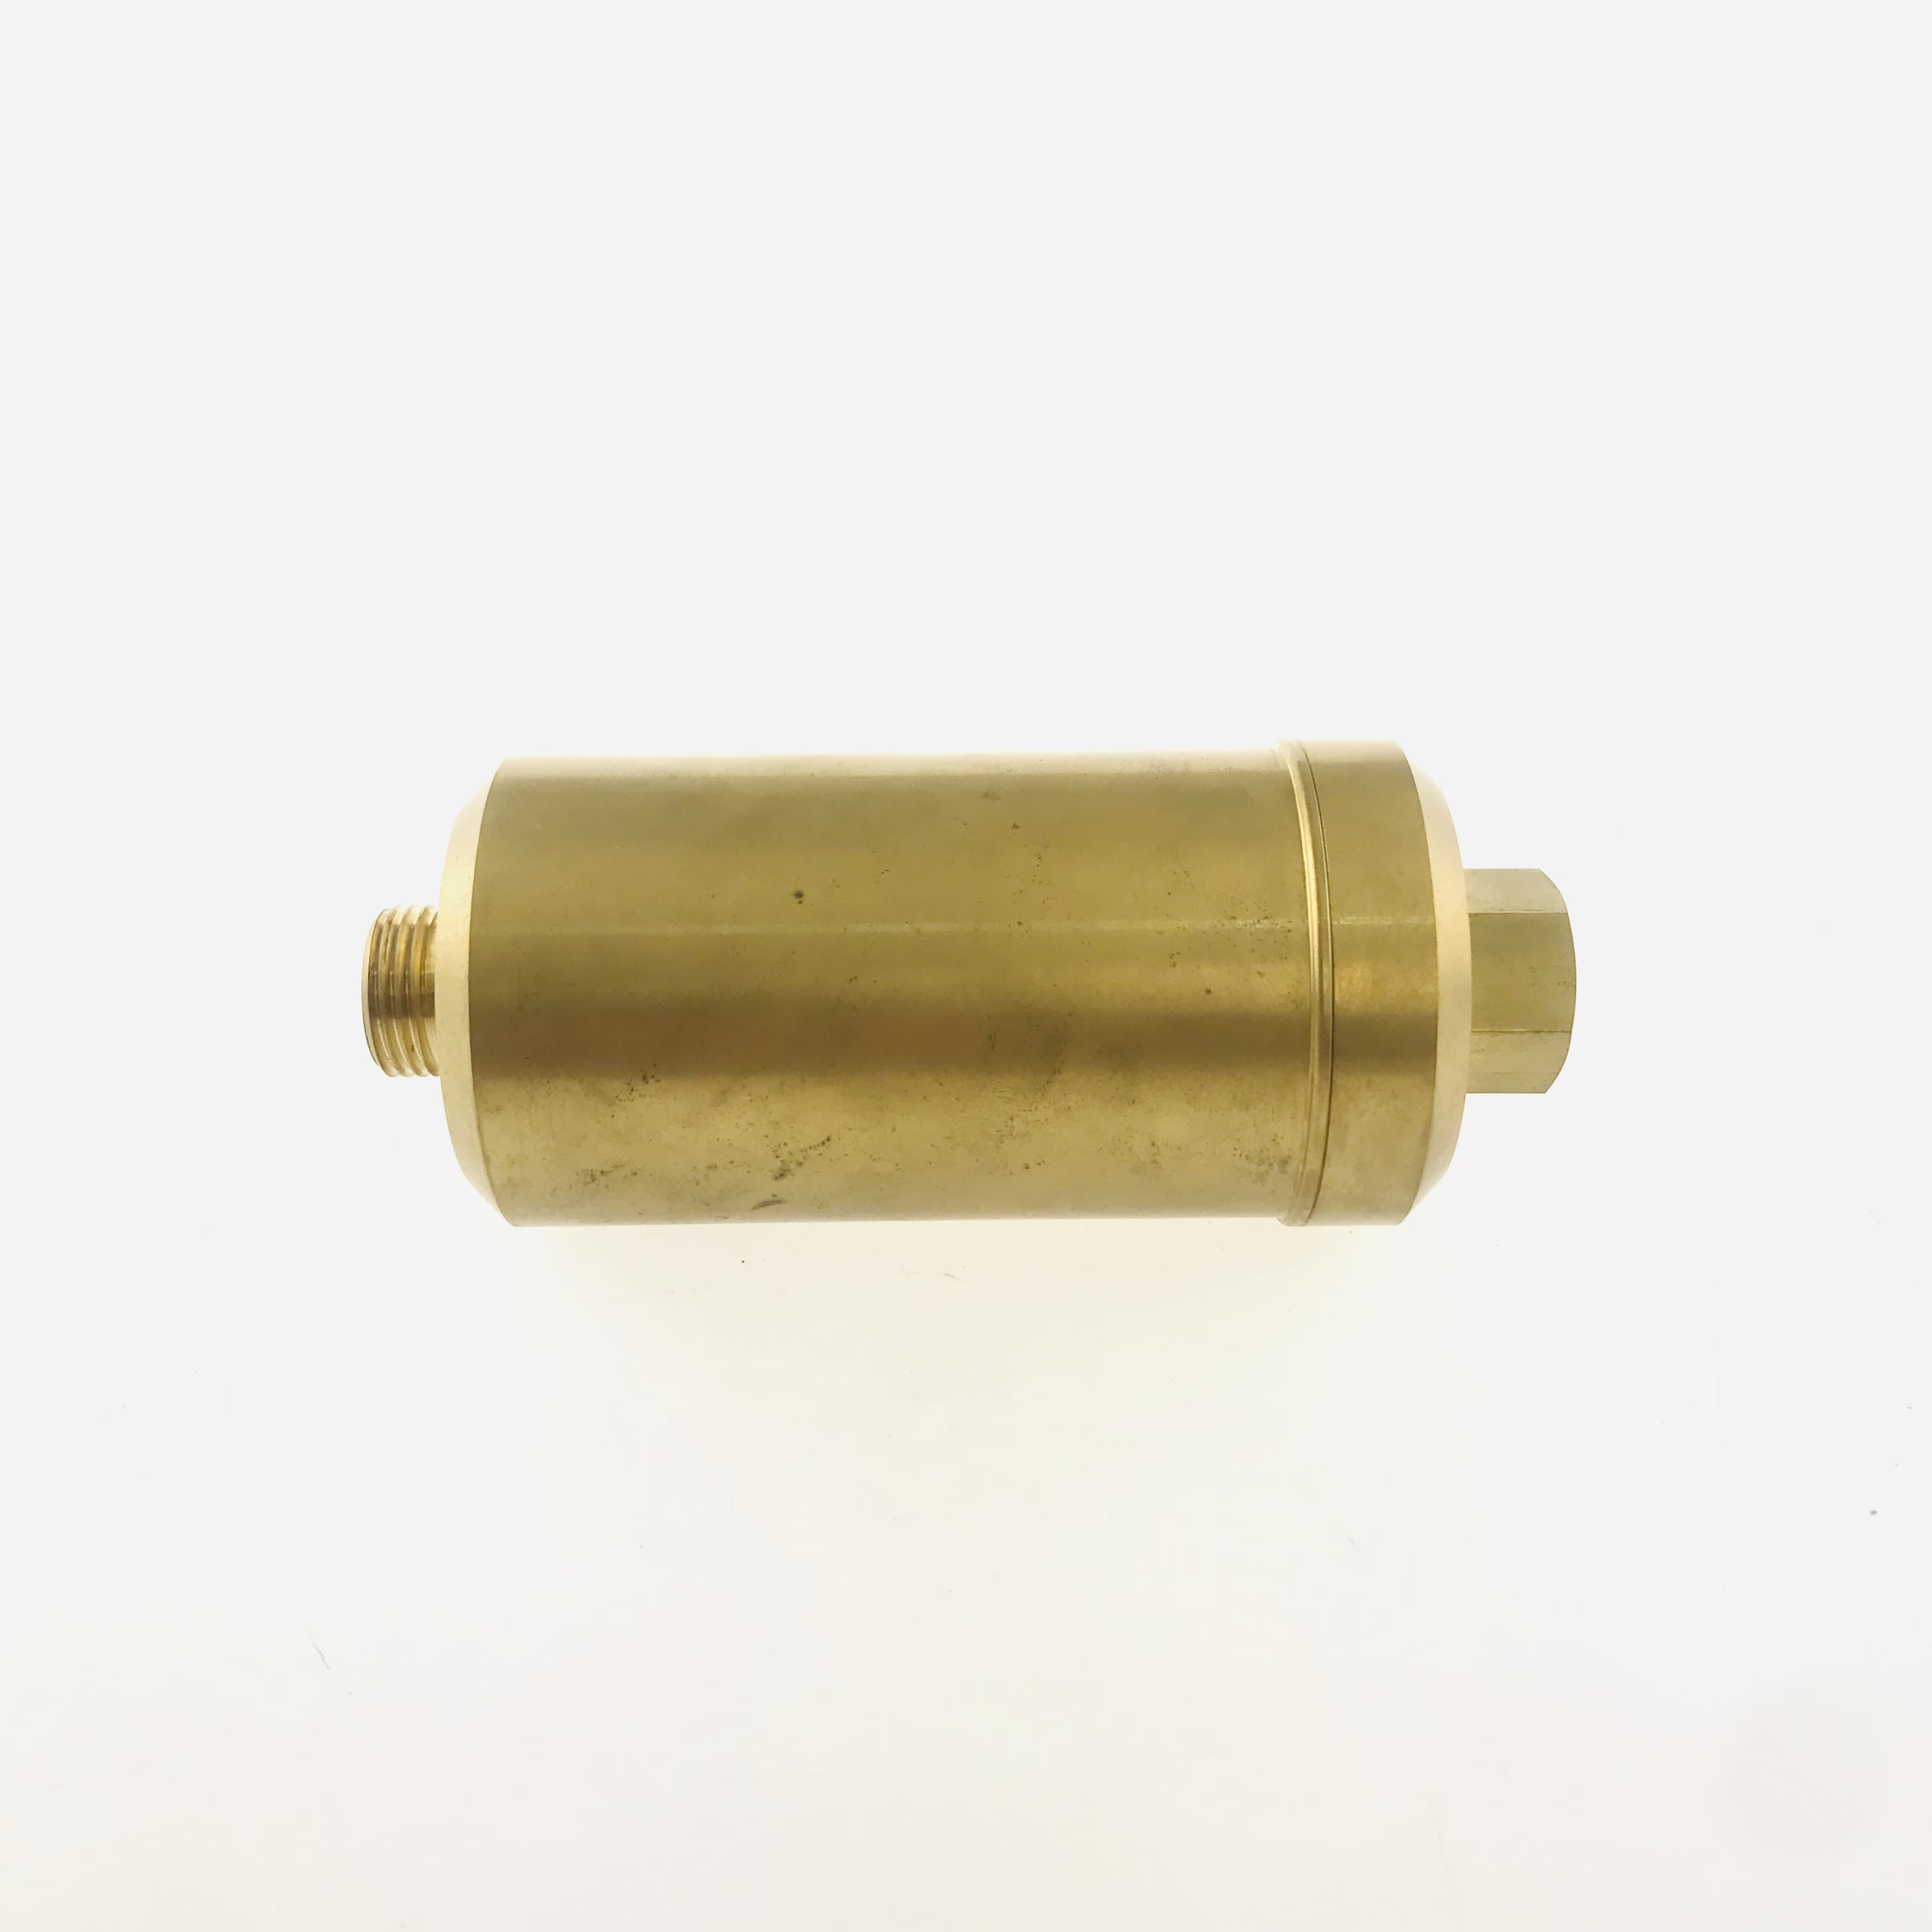 OEM brass plumbing fittings Forged High Pressure Pipe Fittings brass compression fittings Support product customization (1)